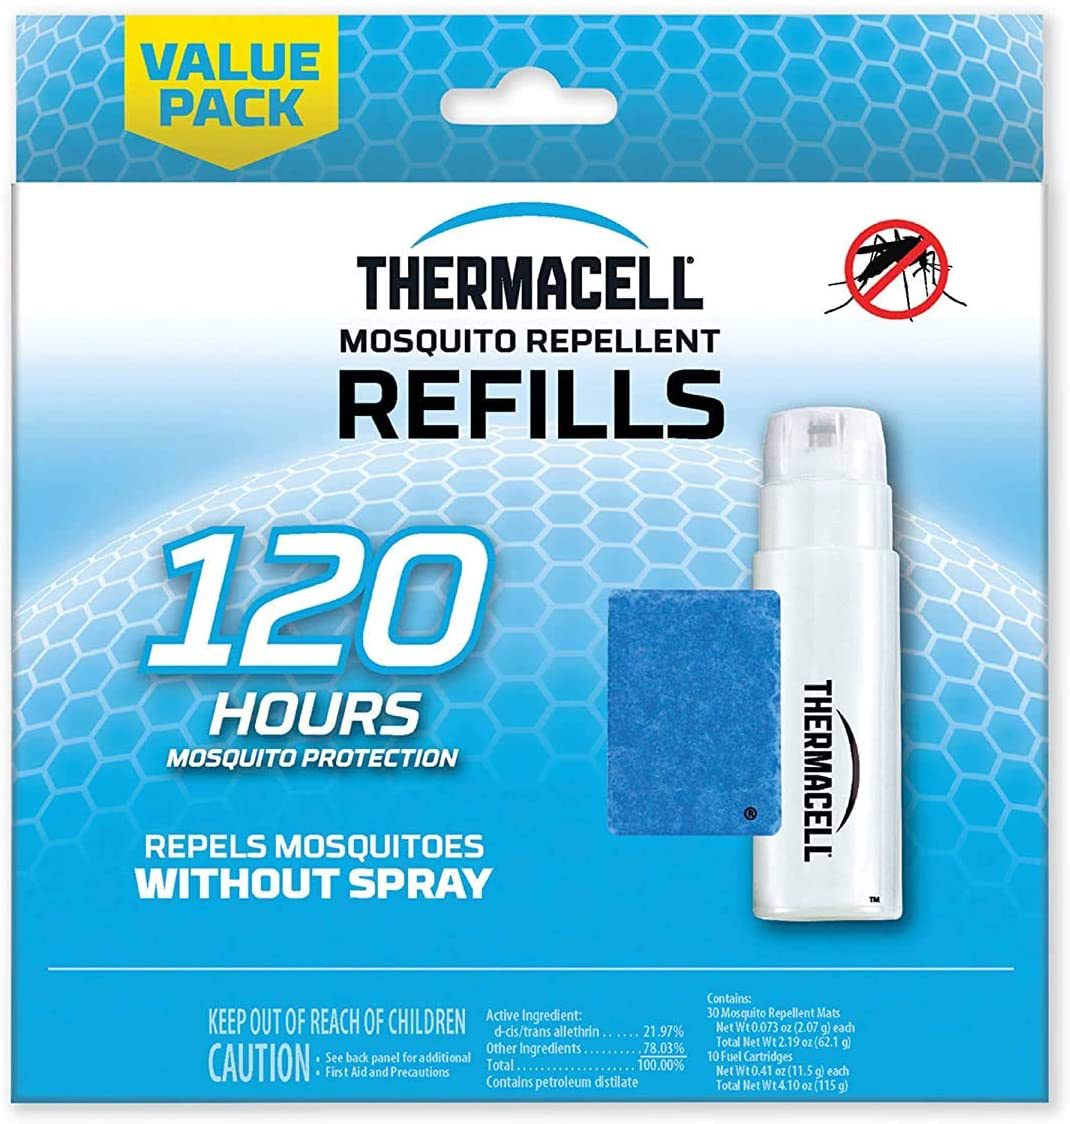 Thermacell Mosquito Repellent Refills; Compatible with Any Fuel-Powered Thermacell Repeller; Highly Effective, Long Lasting, No Spray, No Scent, No Mess; 15 Foot Zone of Mosquito Protection